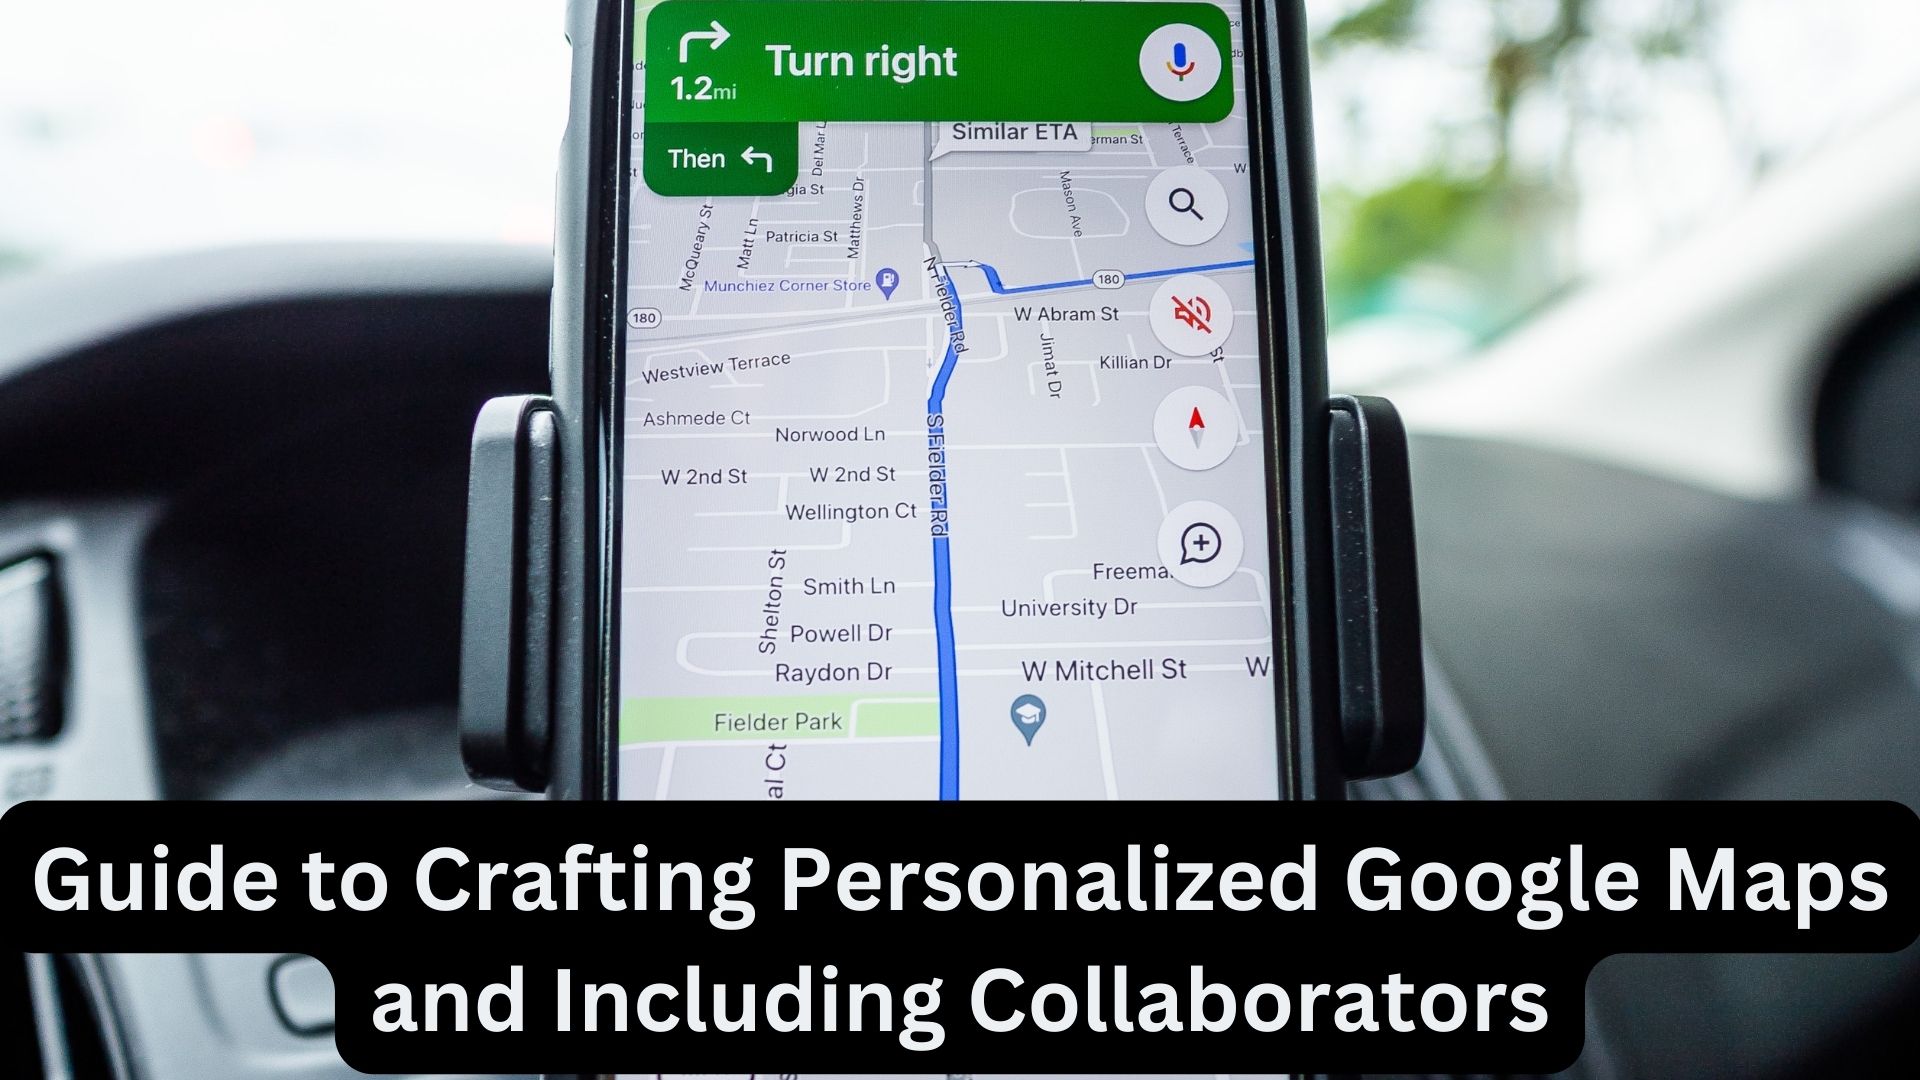 Guide to Crafting Personalized Google Maps and Including Collaborators